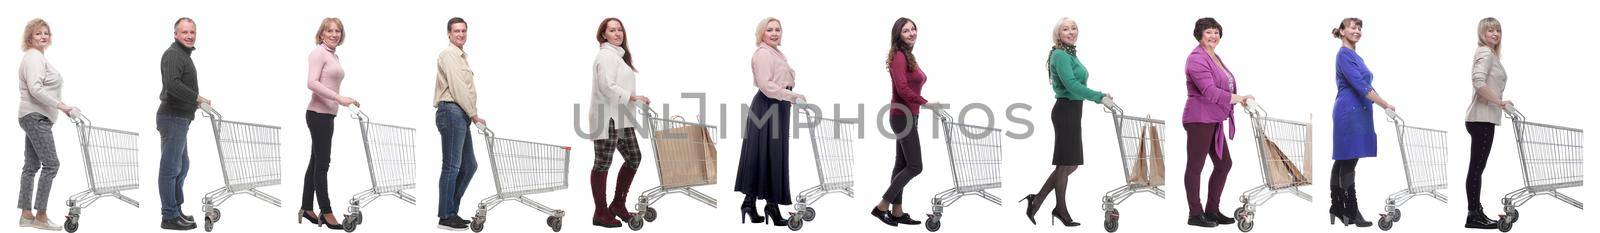 group of people with cart looking at camera isolated on white background